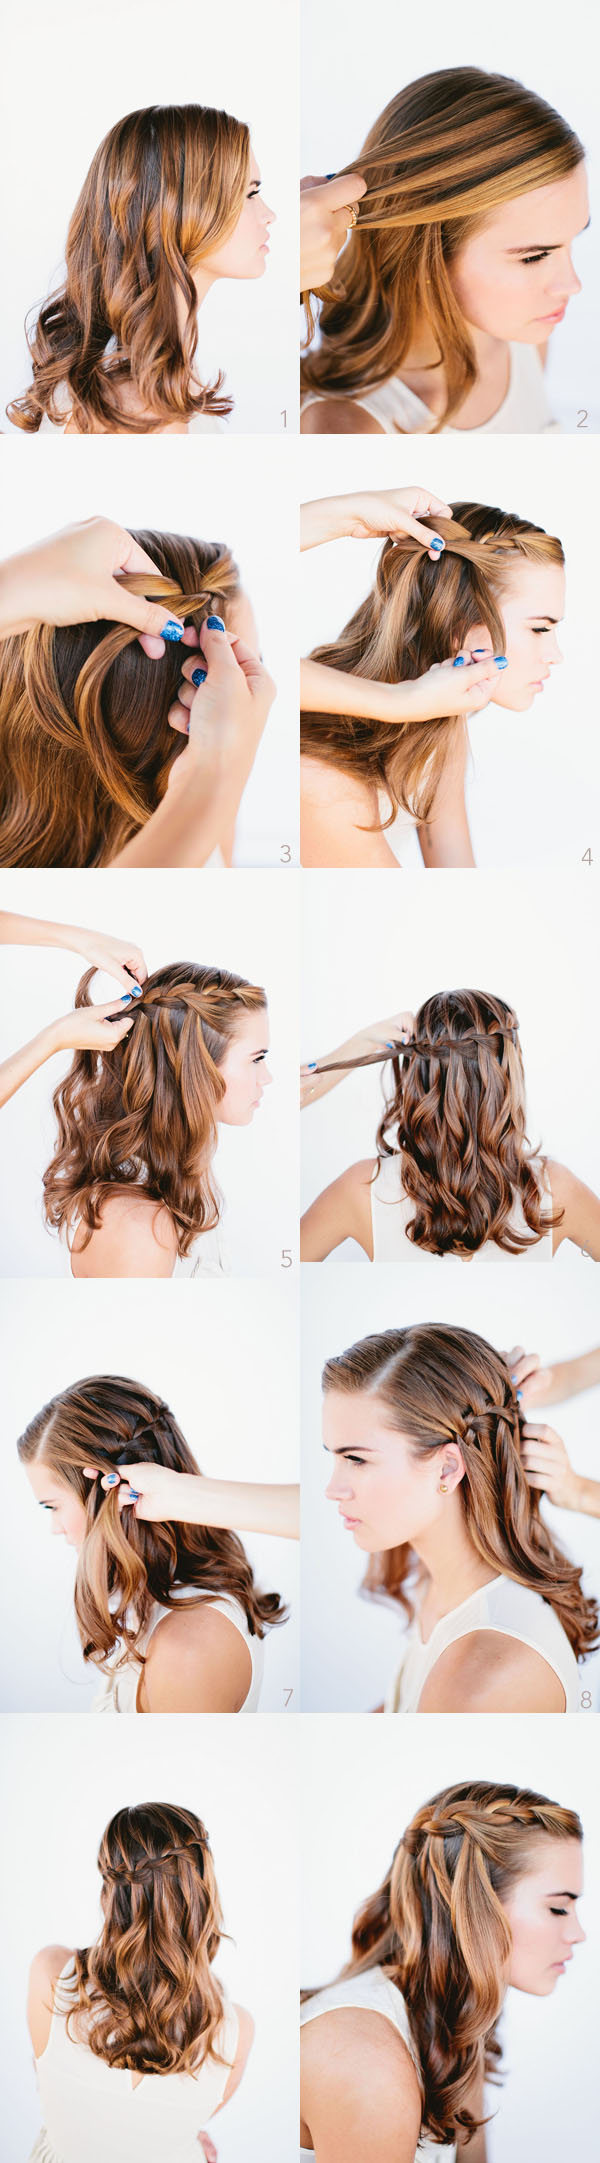 Hairstyles for Long Hair Step by Step-18